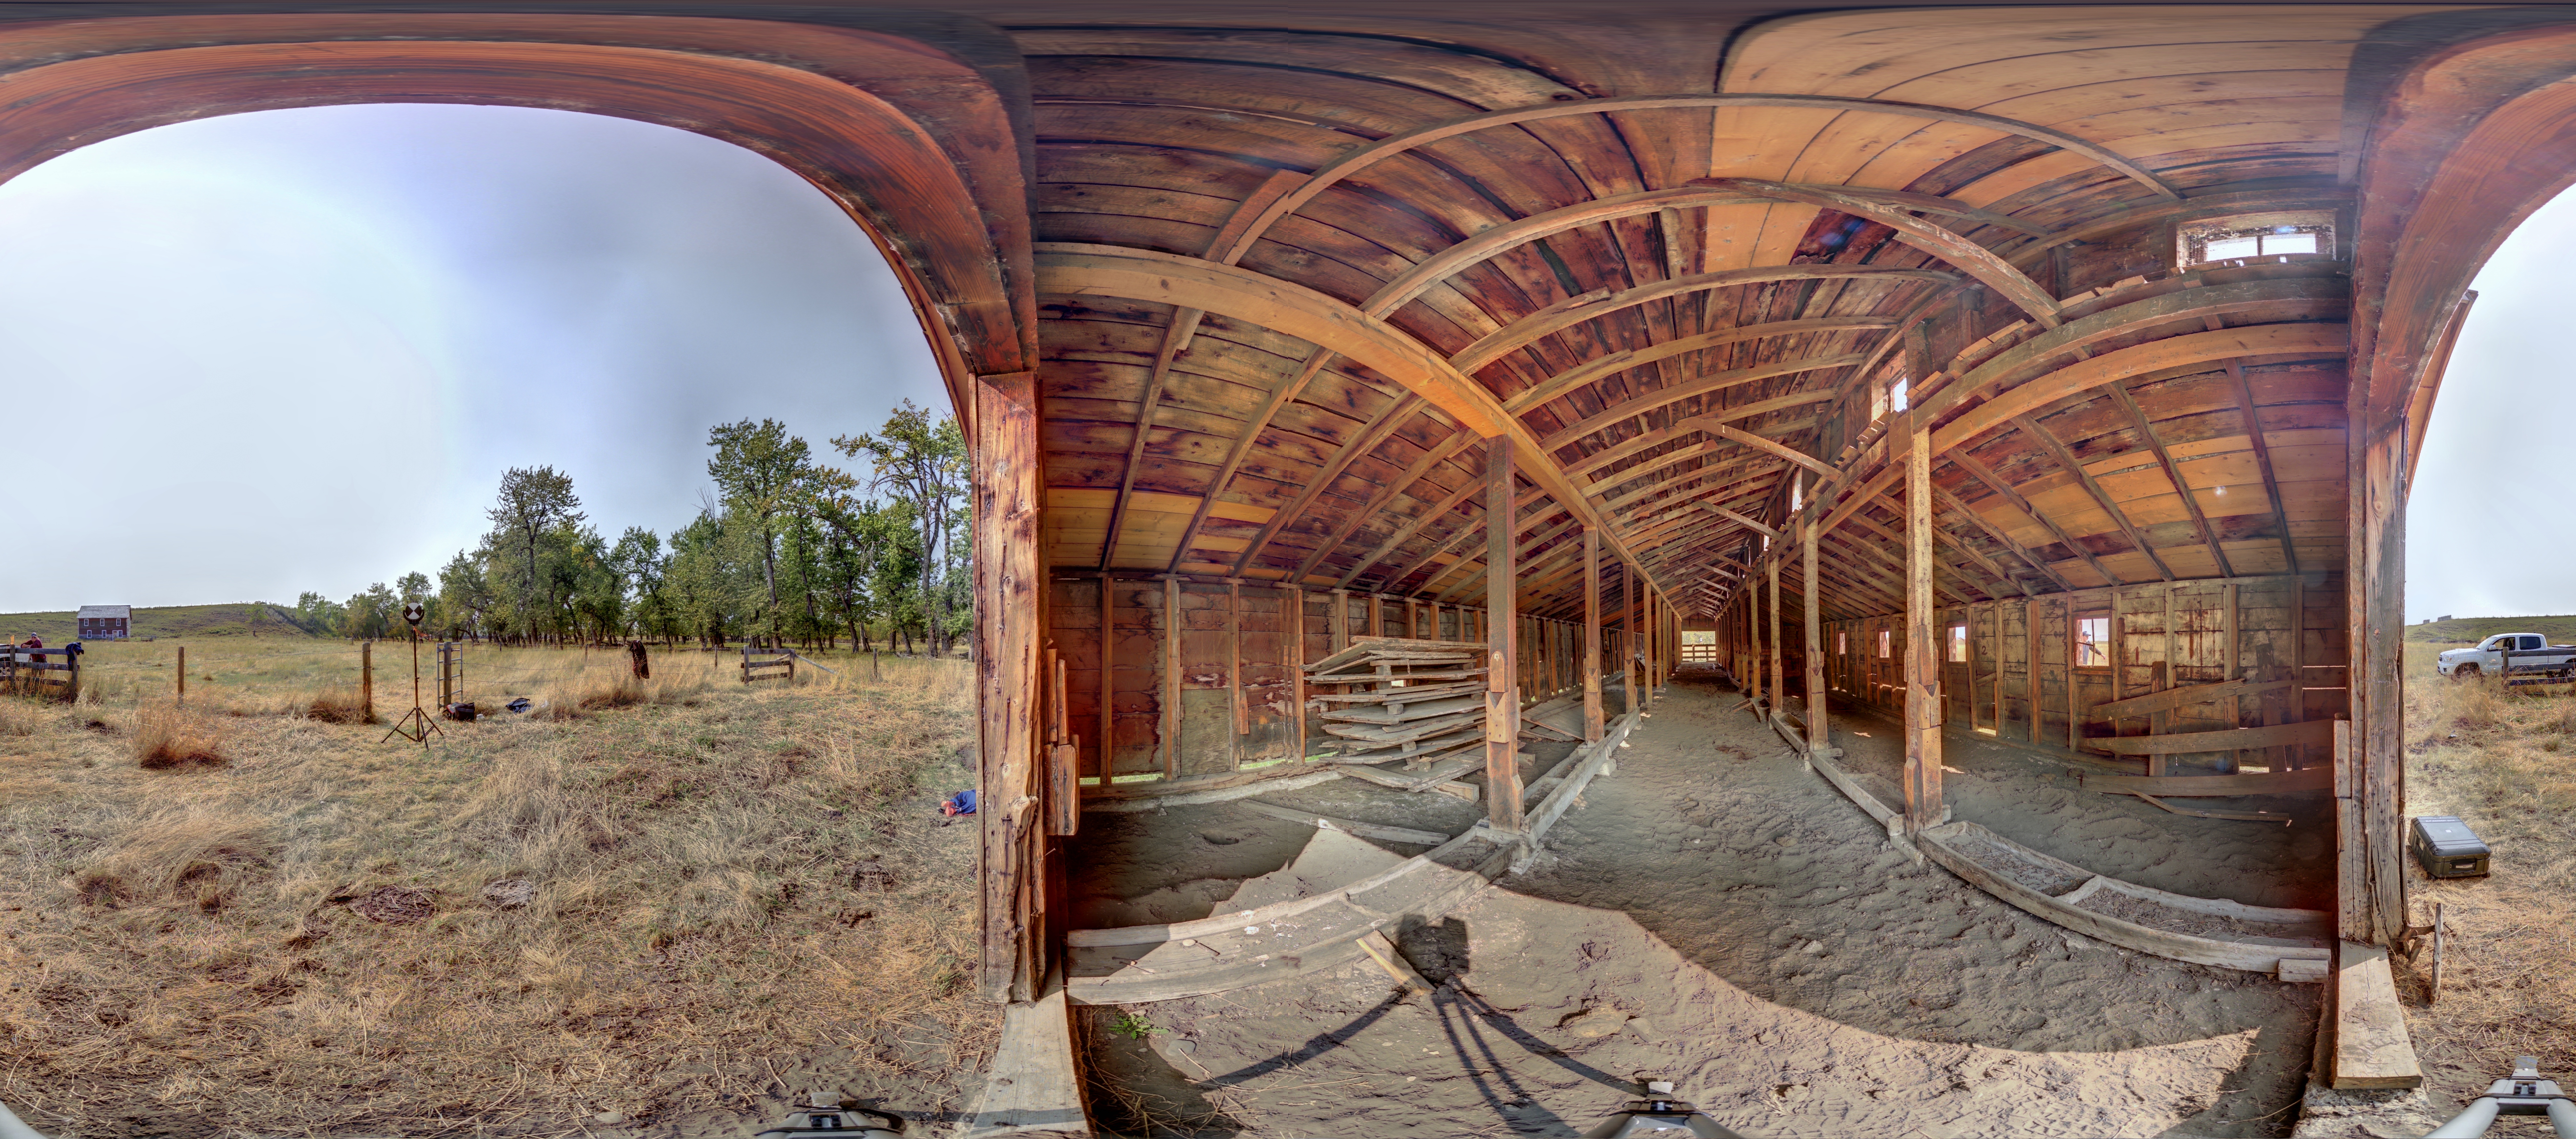 Panoramic image from scan location 23 of the interior of the Piggery at Bar U Ranch